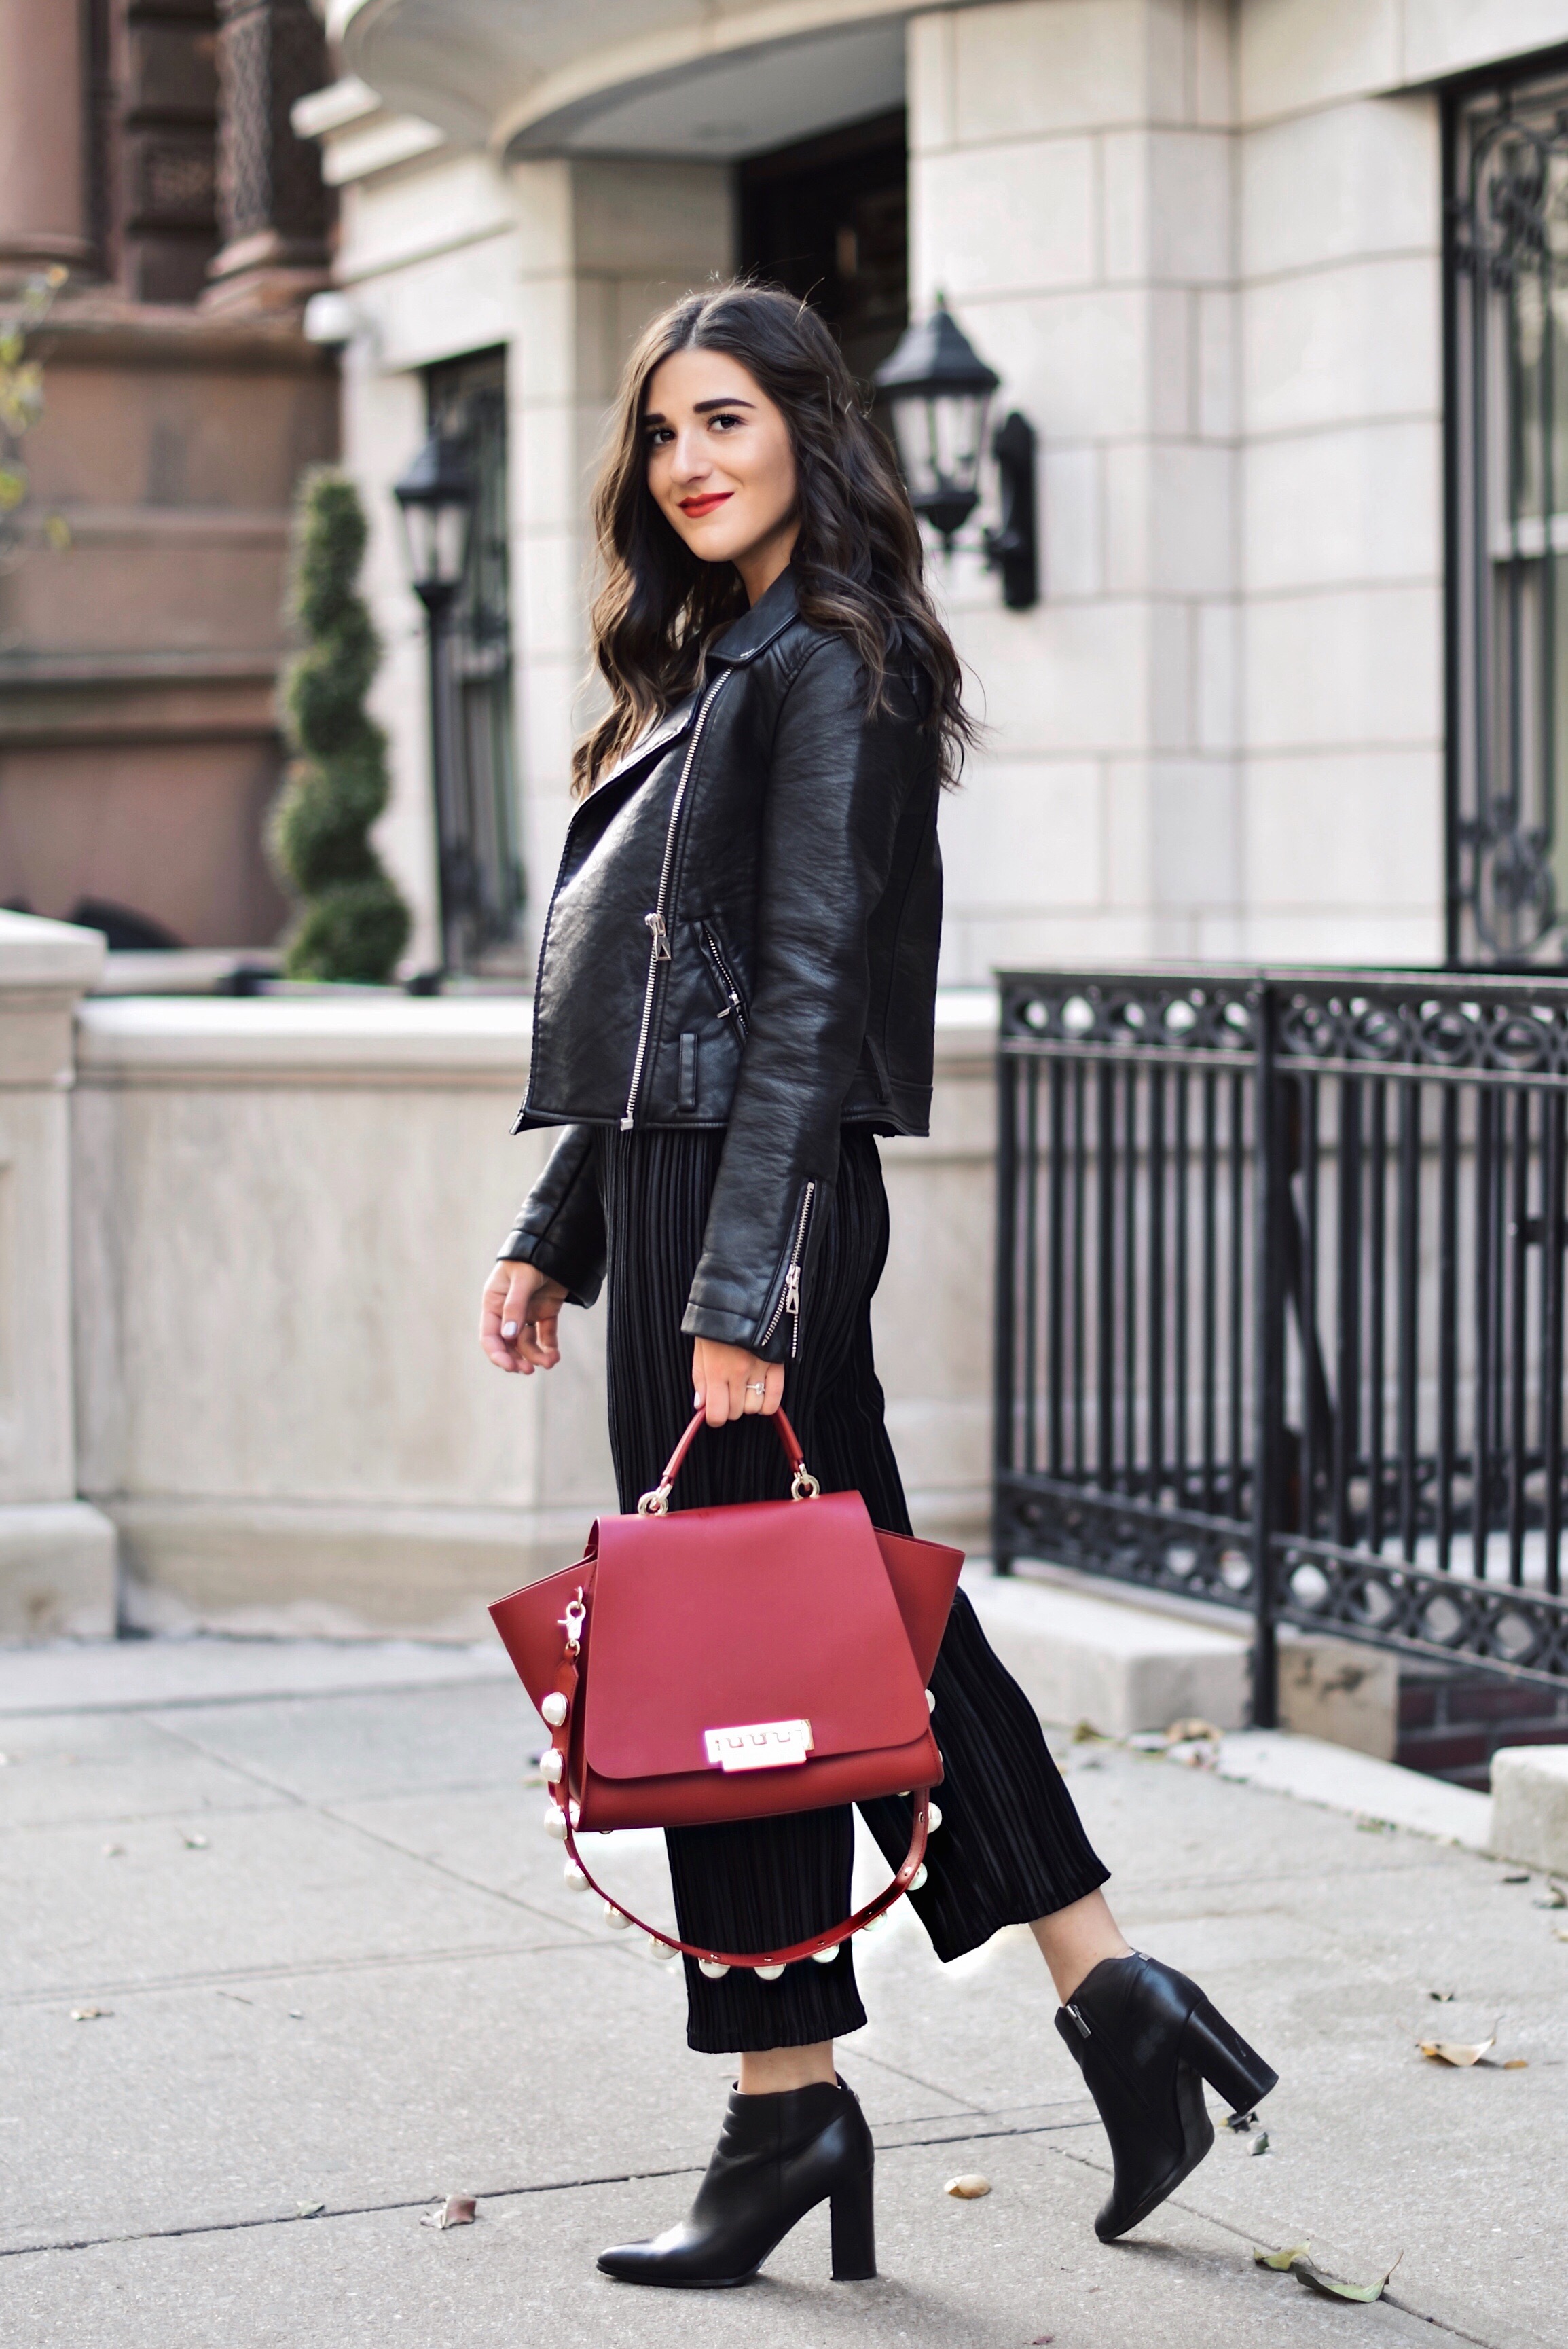 The Secret To Beating The Instagram Algorithm Black Velvet Set Leather Jacket Esther Santer Fashion Blog NYC Street Style Blogger Outfit OOTD Trendy All Black Monochrome Red Purse Zac Posen Bag Collaboration Booties  Winter Fall Look Shopping Wear Buy.jpg